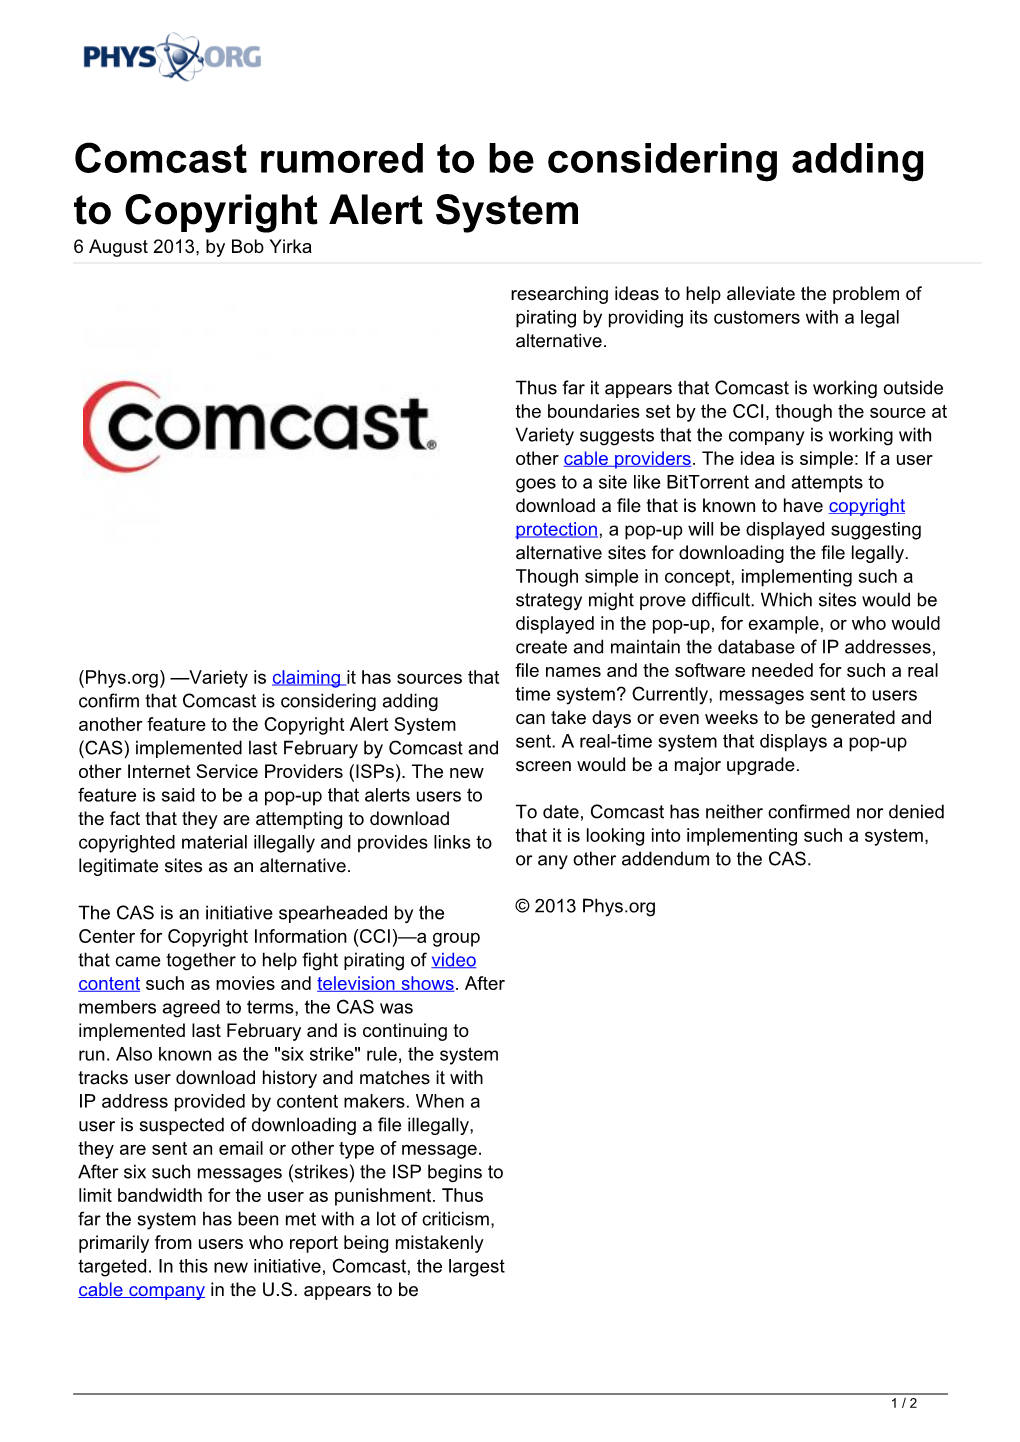 Comcast Rumored to Be Considering Adding to Copyright Alert System 6 August 2013, by Bob Yirka